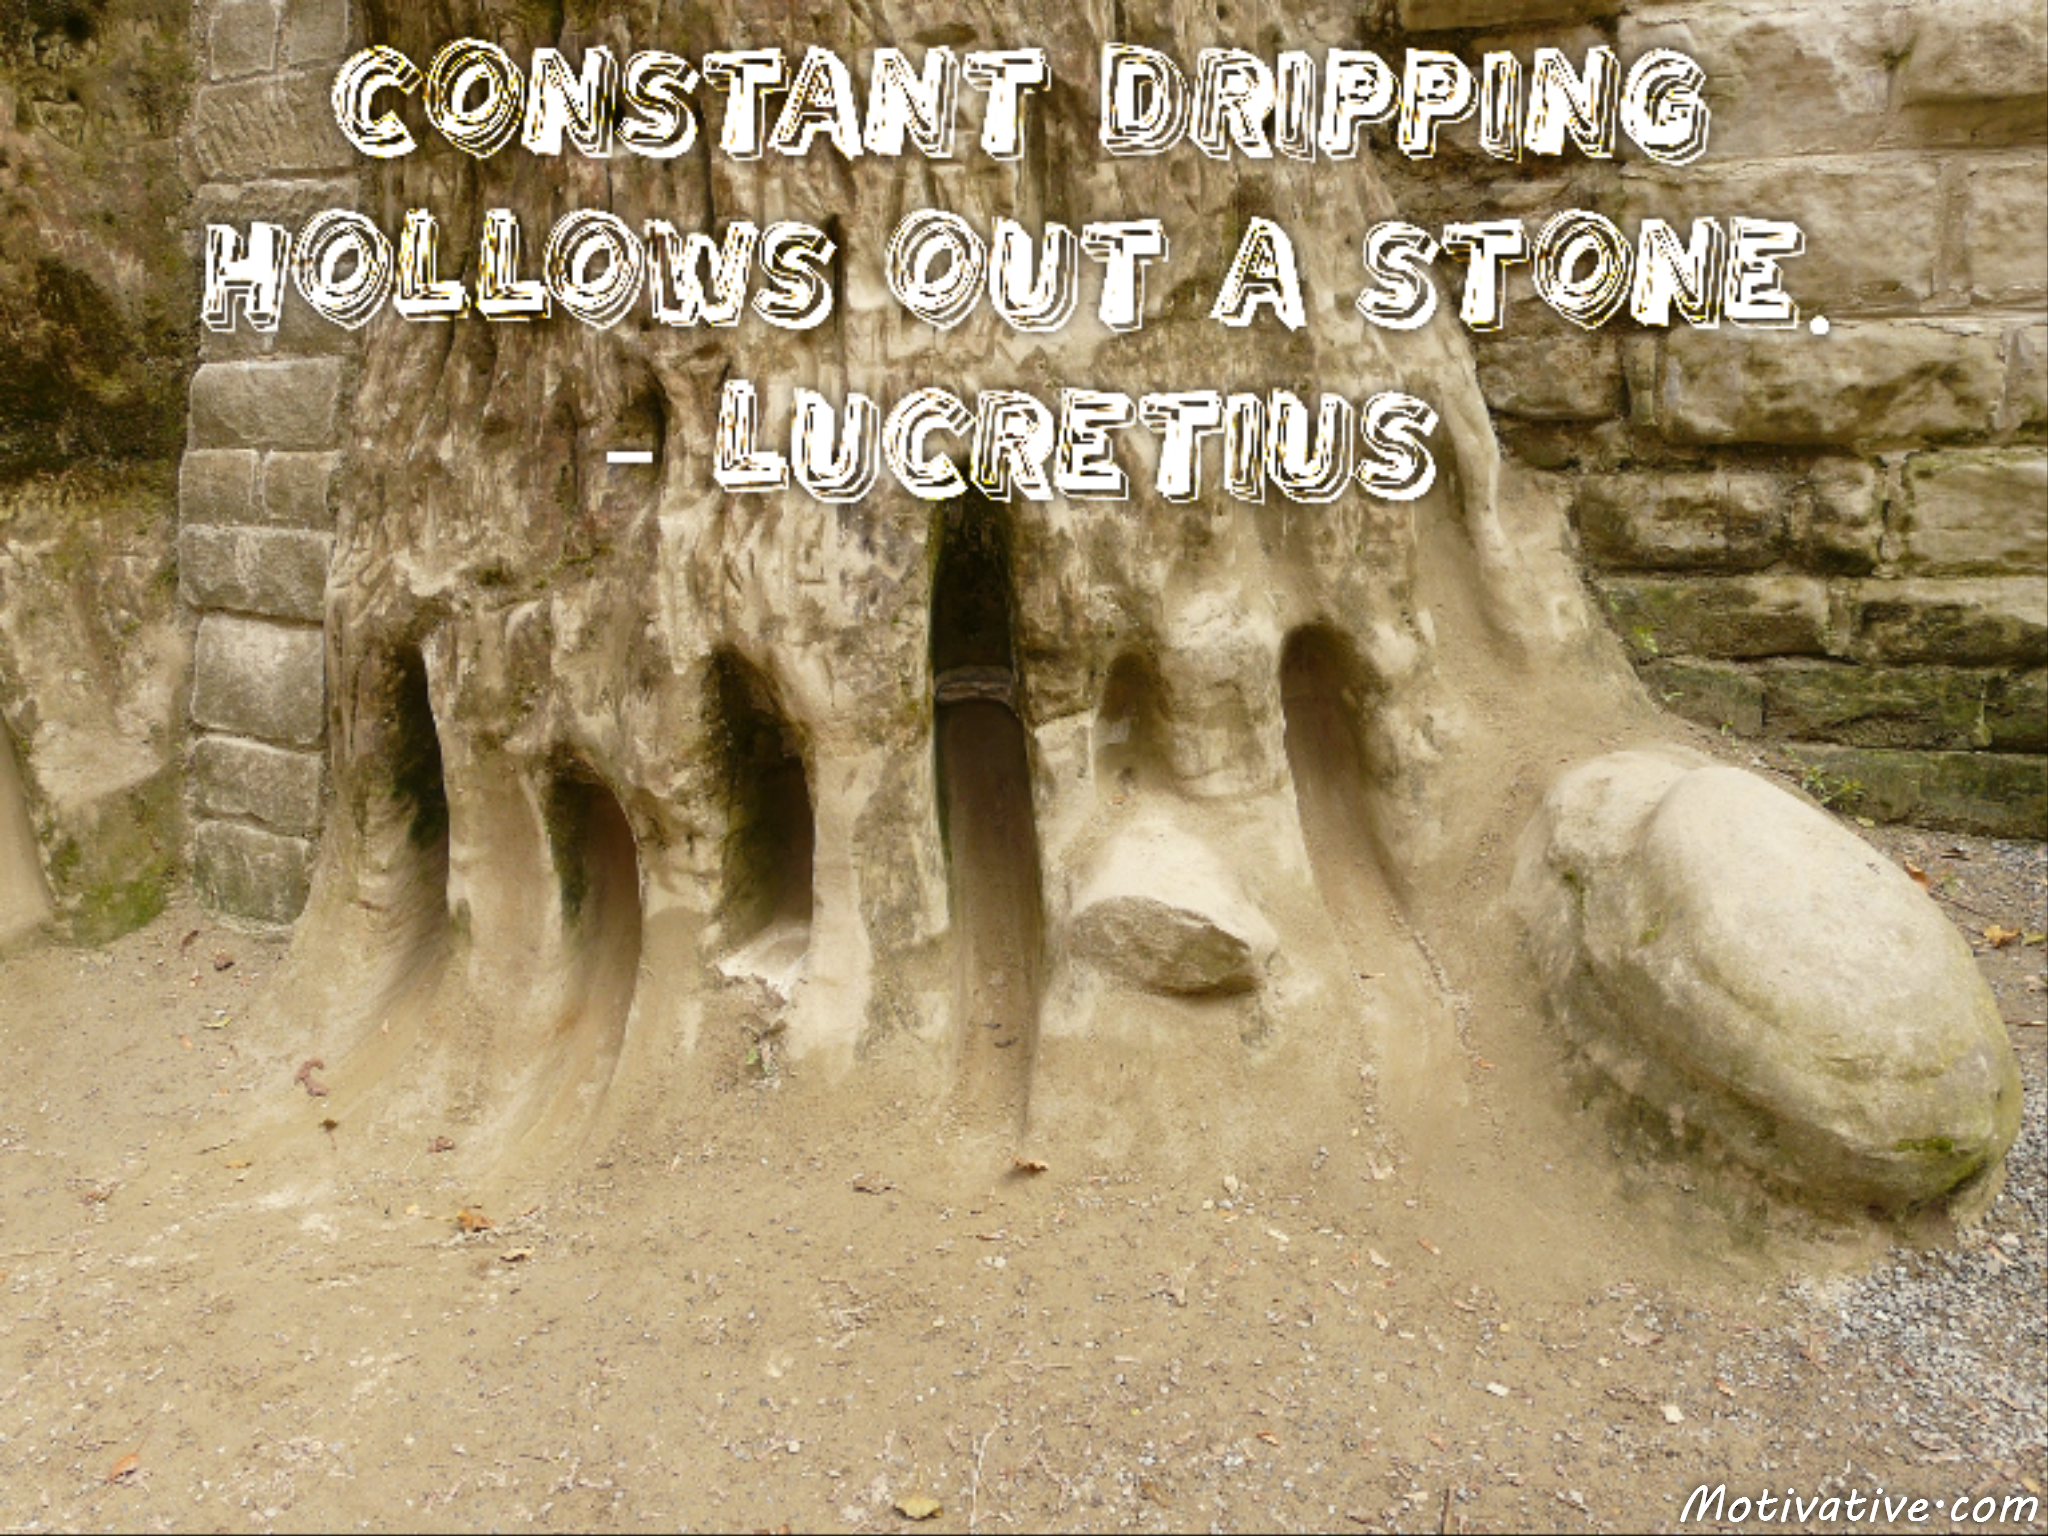 Constant dripping hollows out a stone. – Lucretius